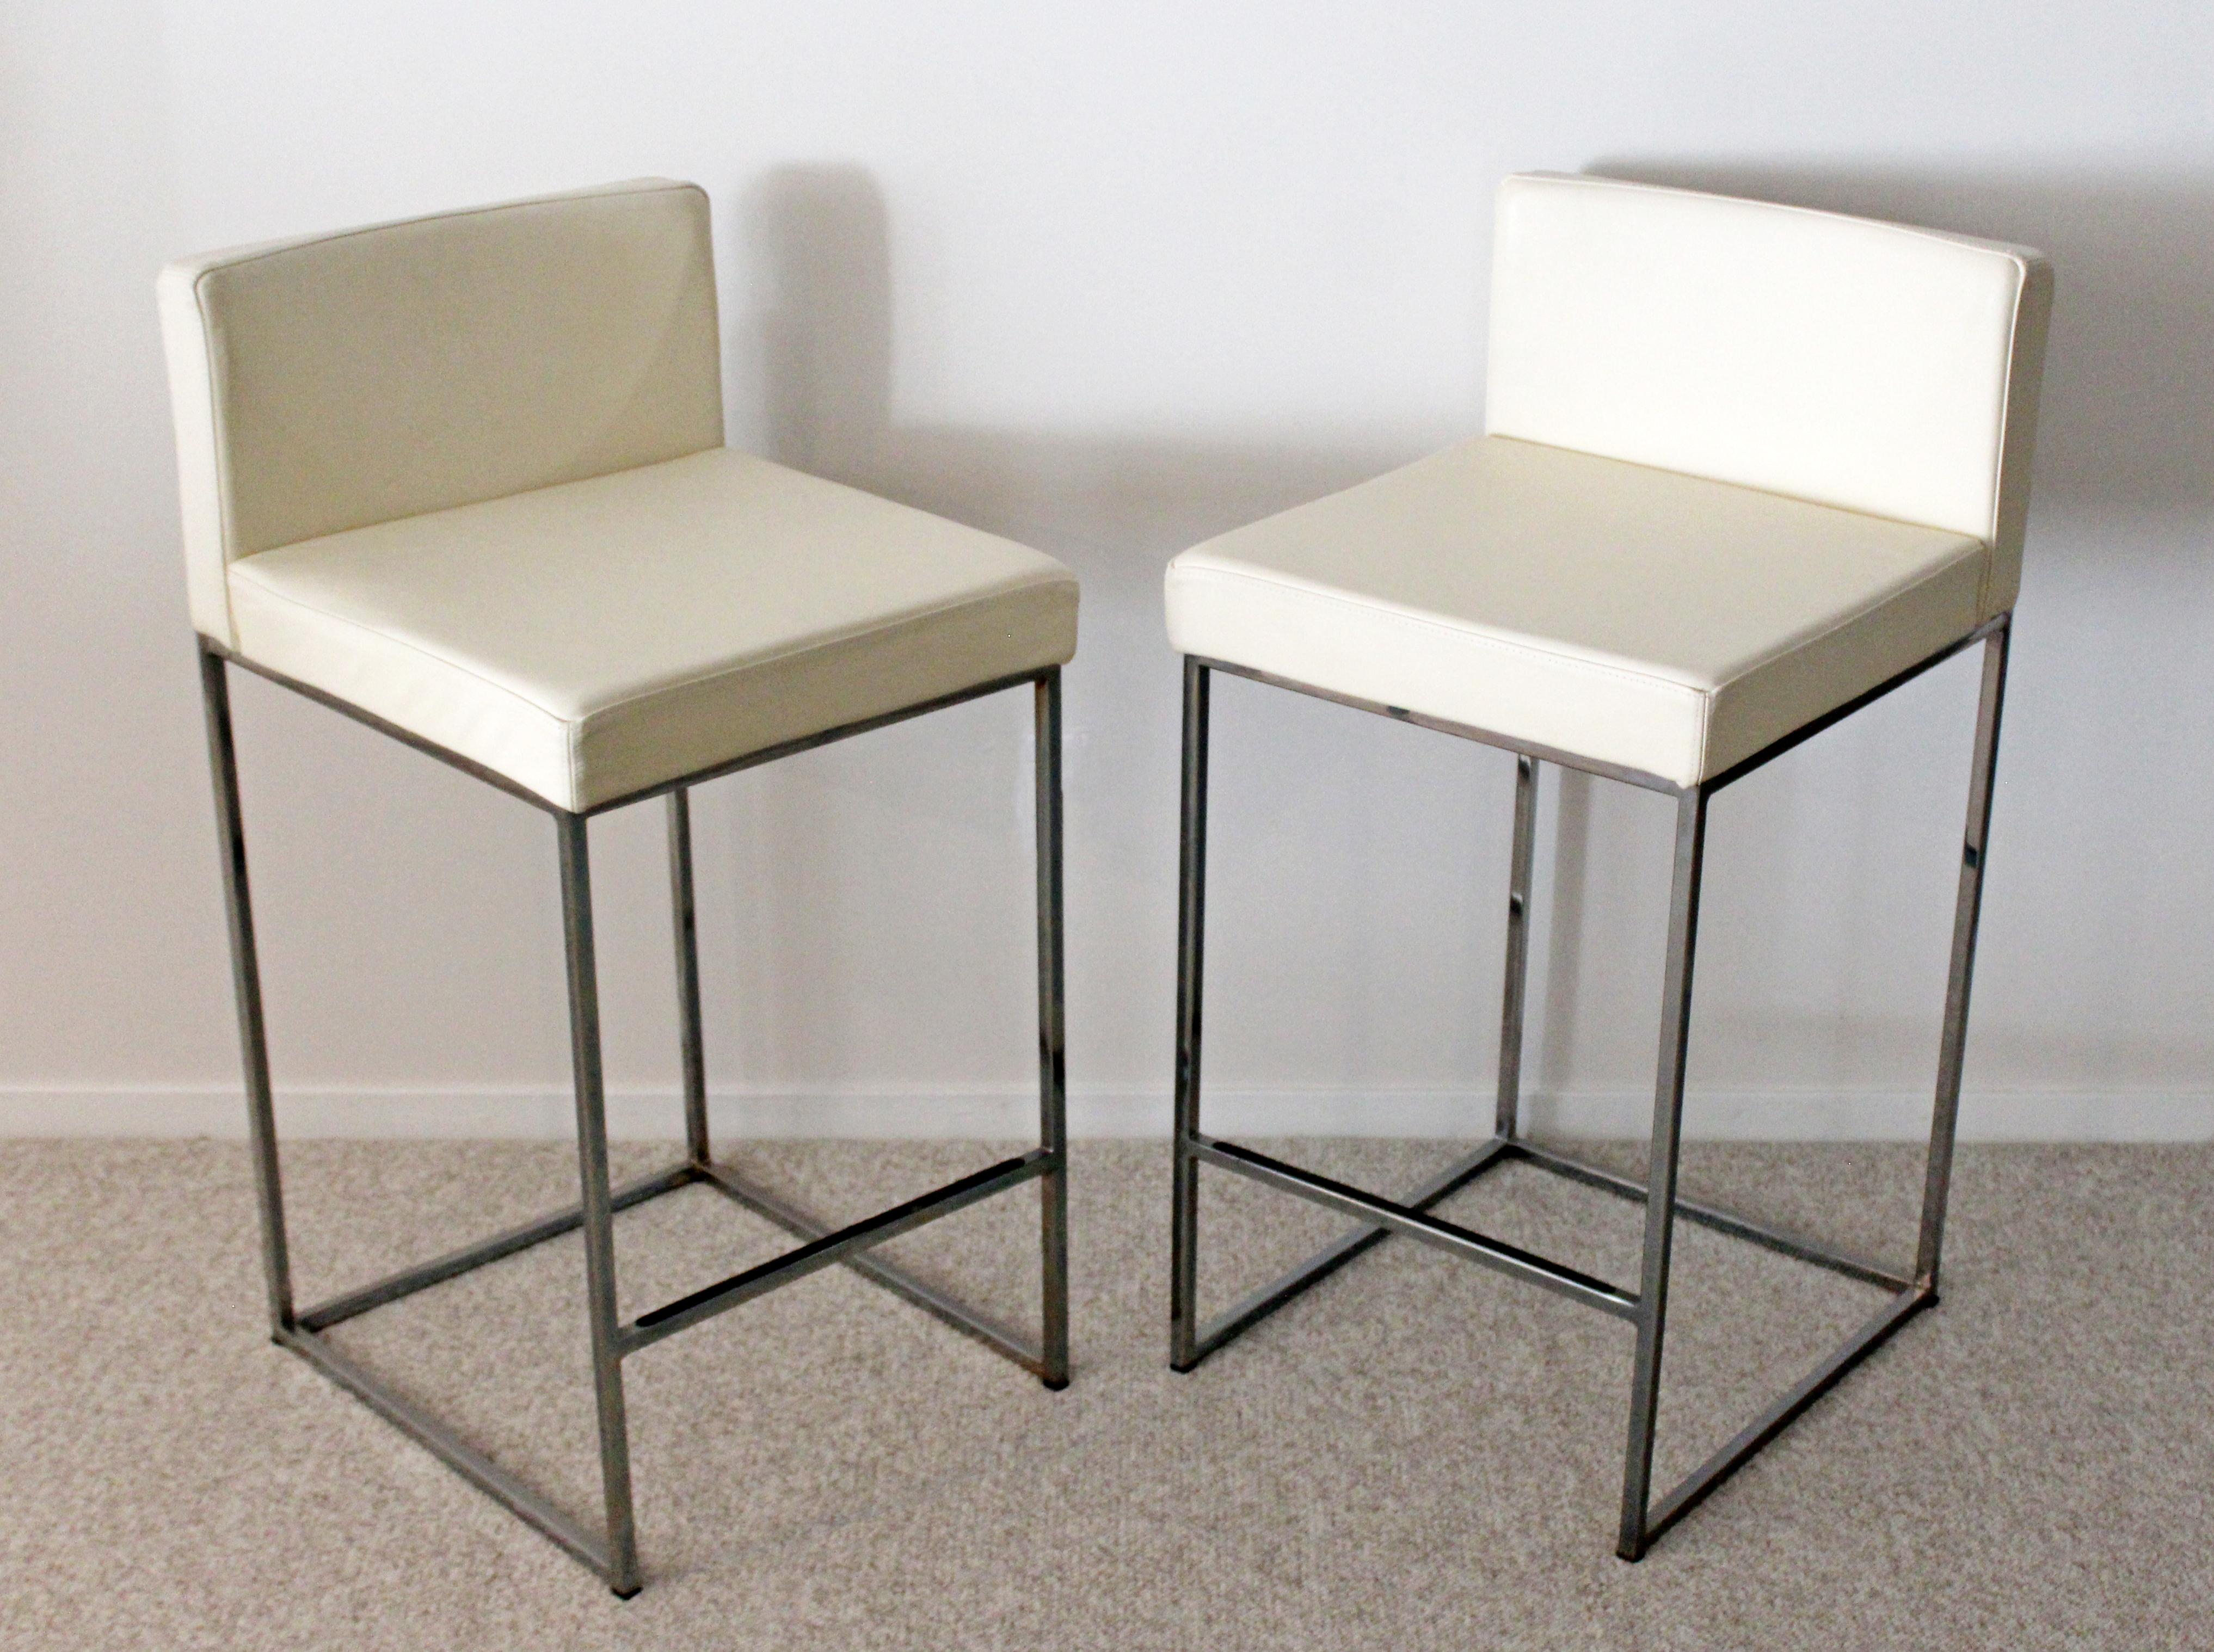 For your consideration is a spectacular pair of counter stools, with white leather seats on brushed aluminum bases, by Calligaris, made in Italy. In excellent condition. The dimensions are 17